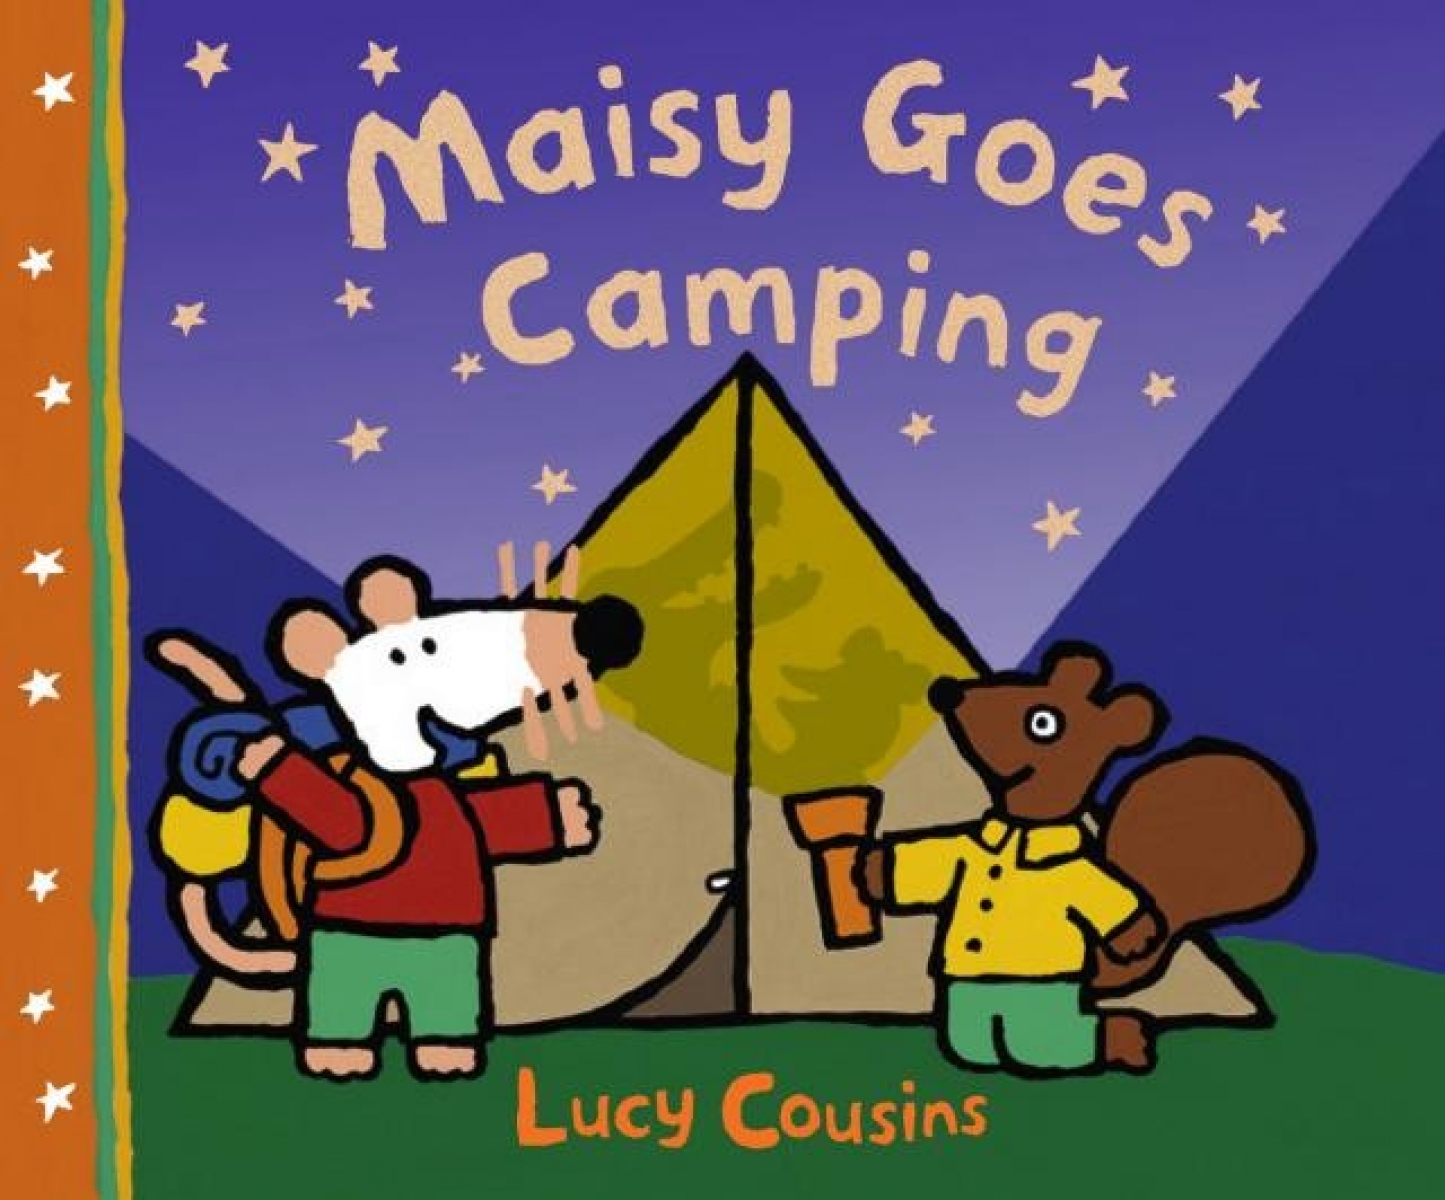 Cousins Lucy Maisy goes camping 